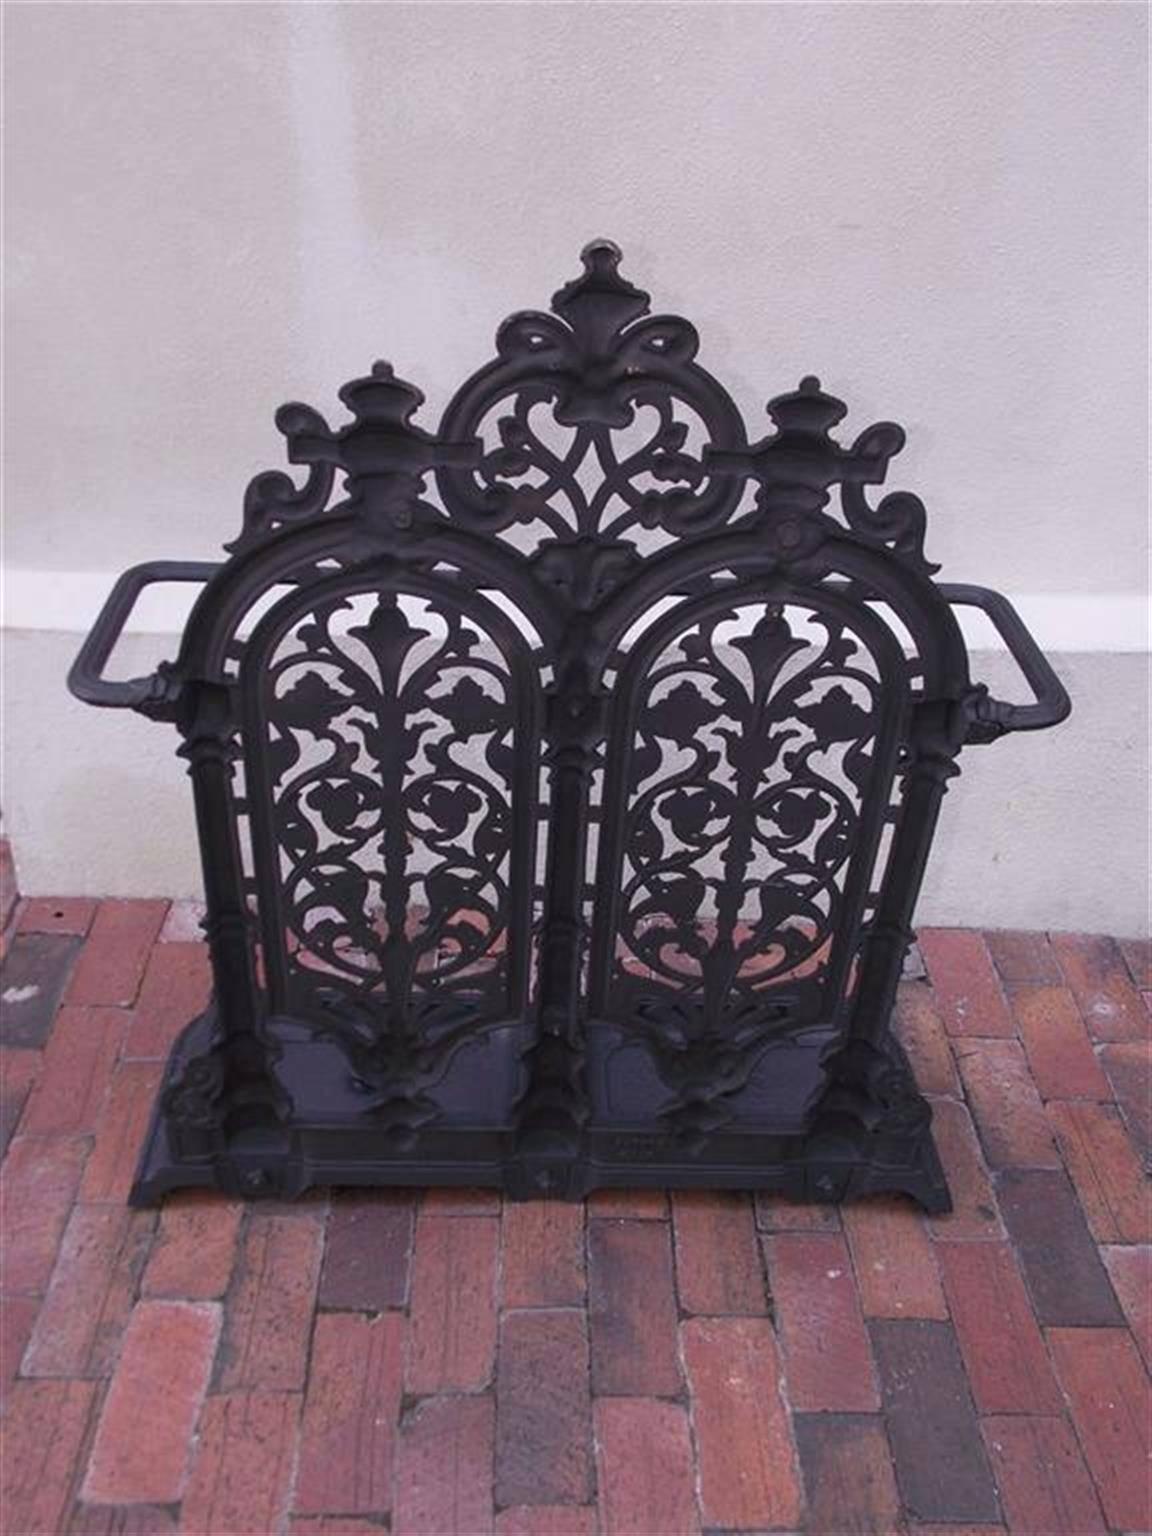 Scottish cast iron umbrella stand with decorative urns, swags, and floral motif resting on a molded edge rectangular base with two removable pans for water . Mid-19th century. Carron Company was the first large-scale cast iron smelting company in